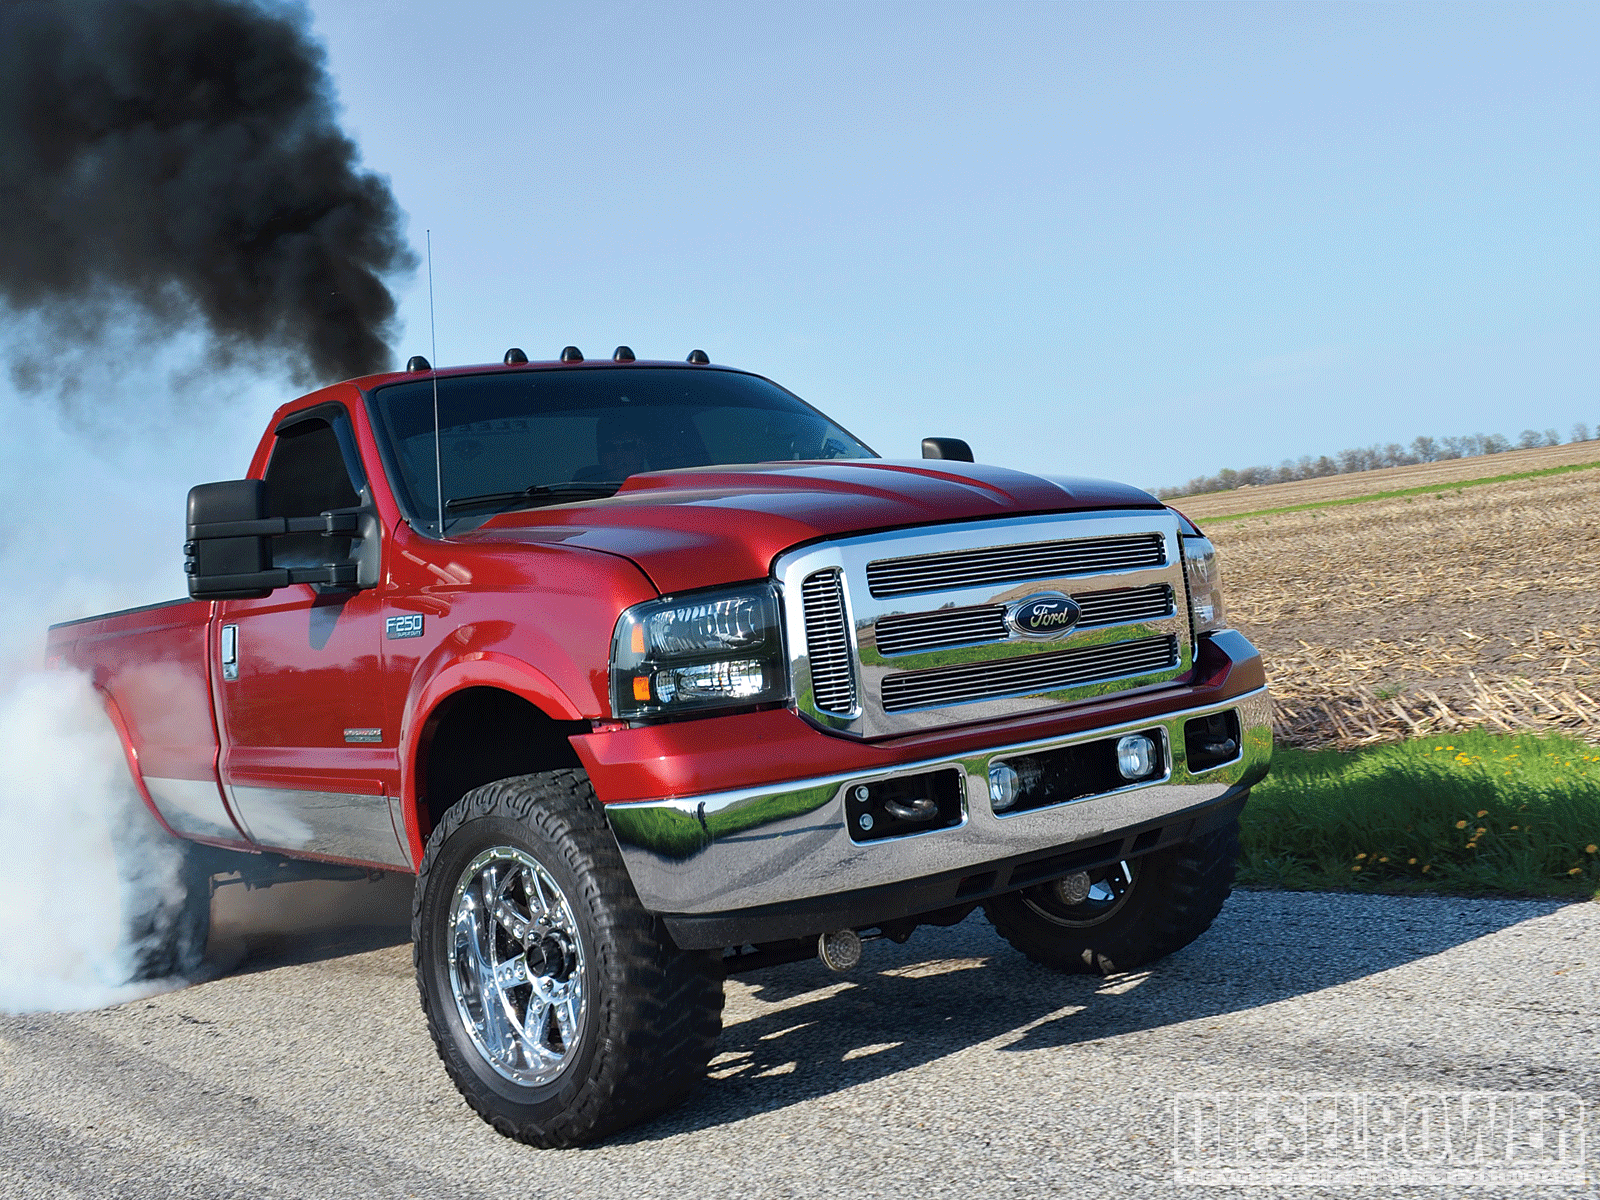 Ford F Harley Davidson Hd Wallpapers Backgrounds Ford Trucks Ford Excursion Built Truck